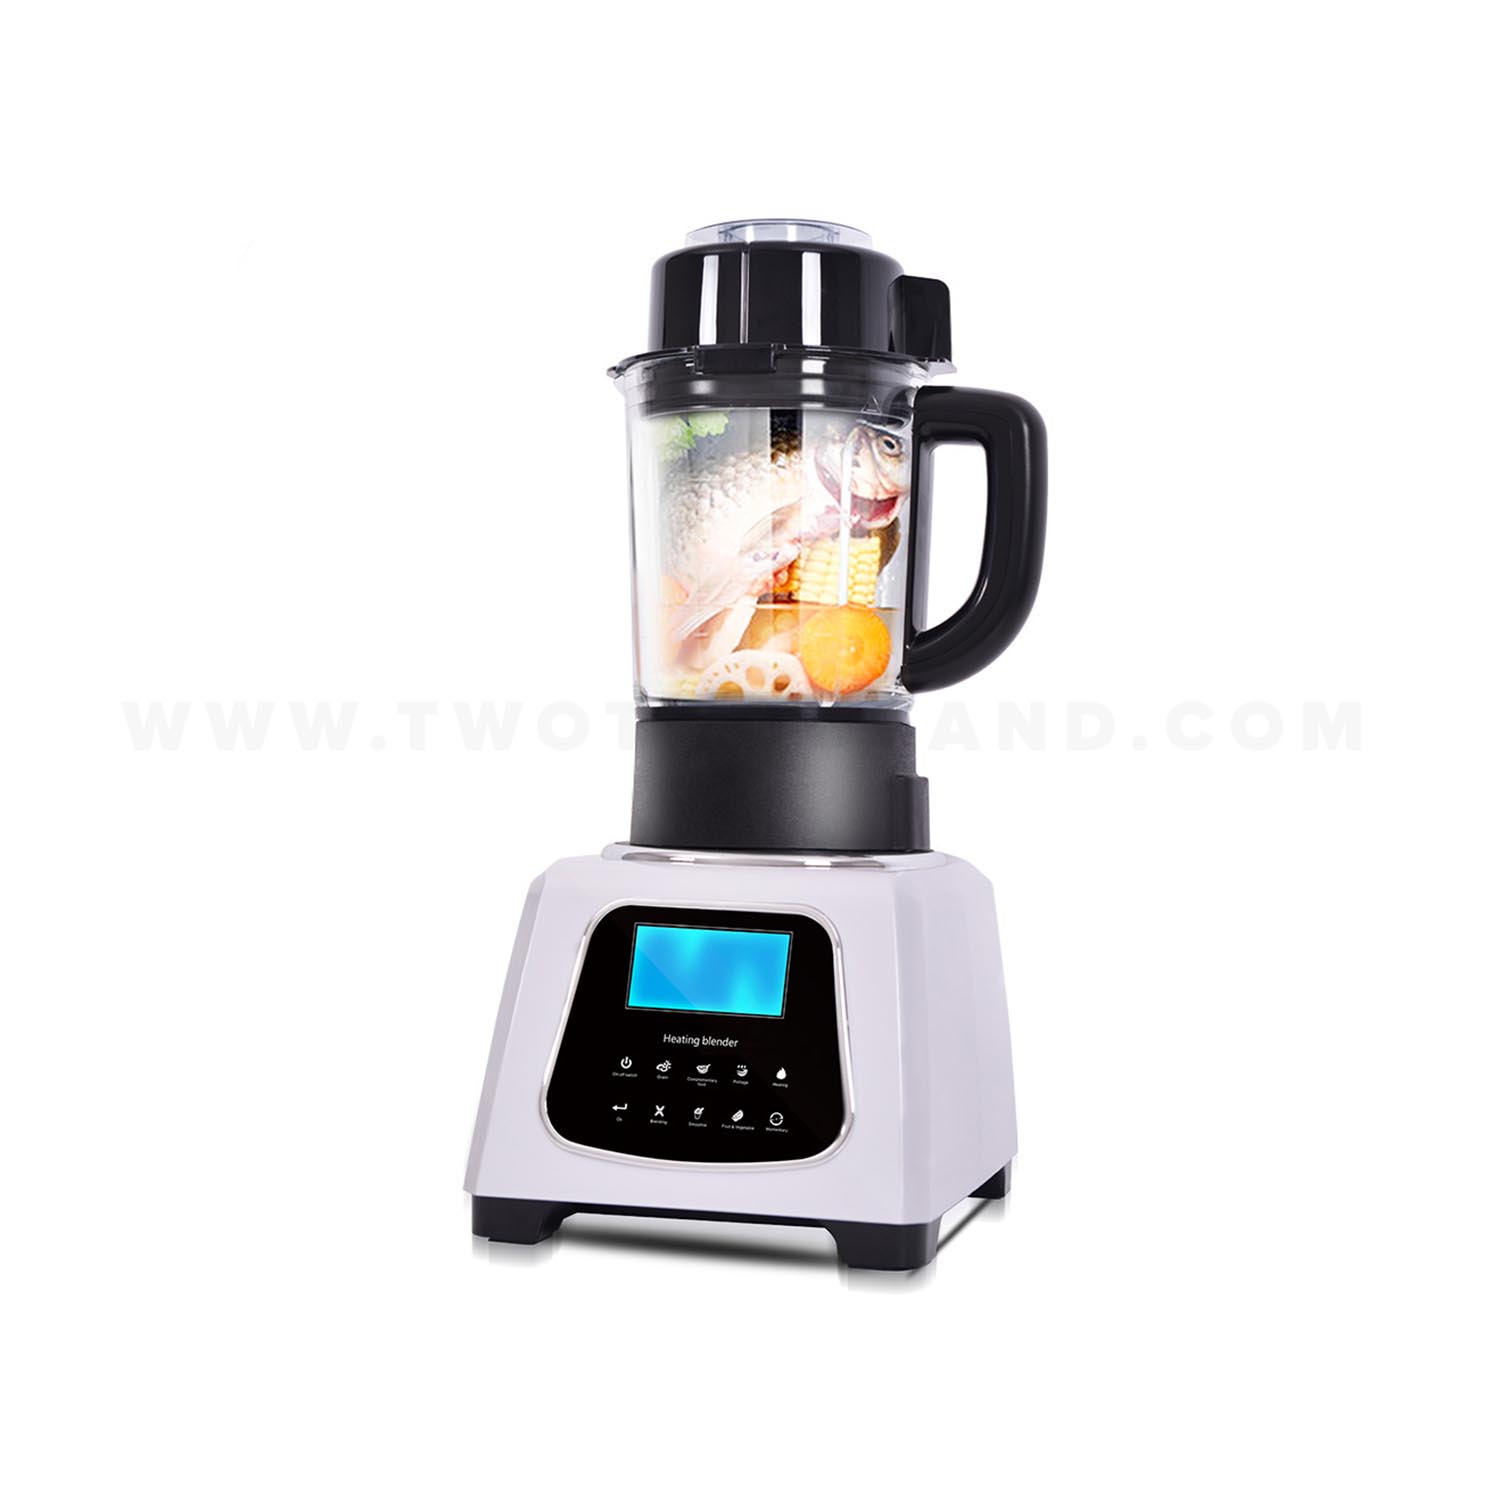 dose Steer collateral 1.75L 1000W Adjustable Speed Commercial Heated Blender Machine TT-HB121